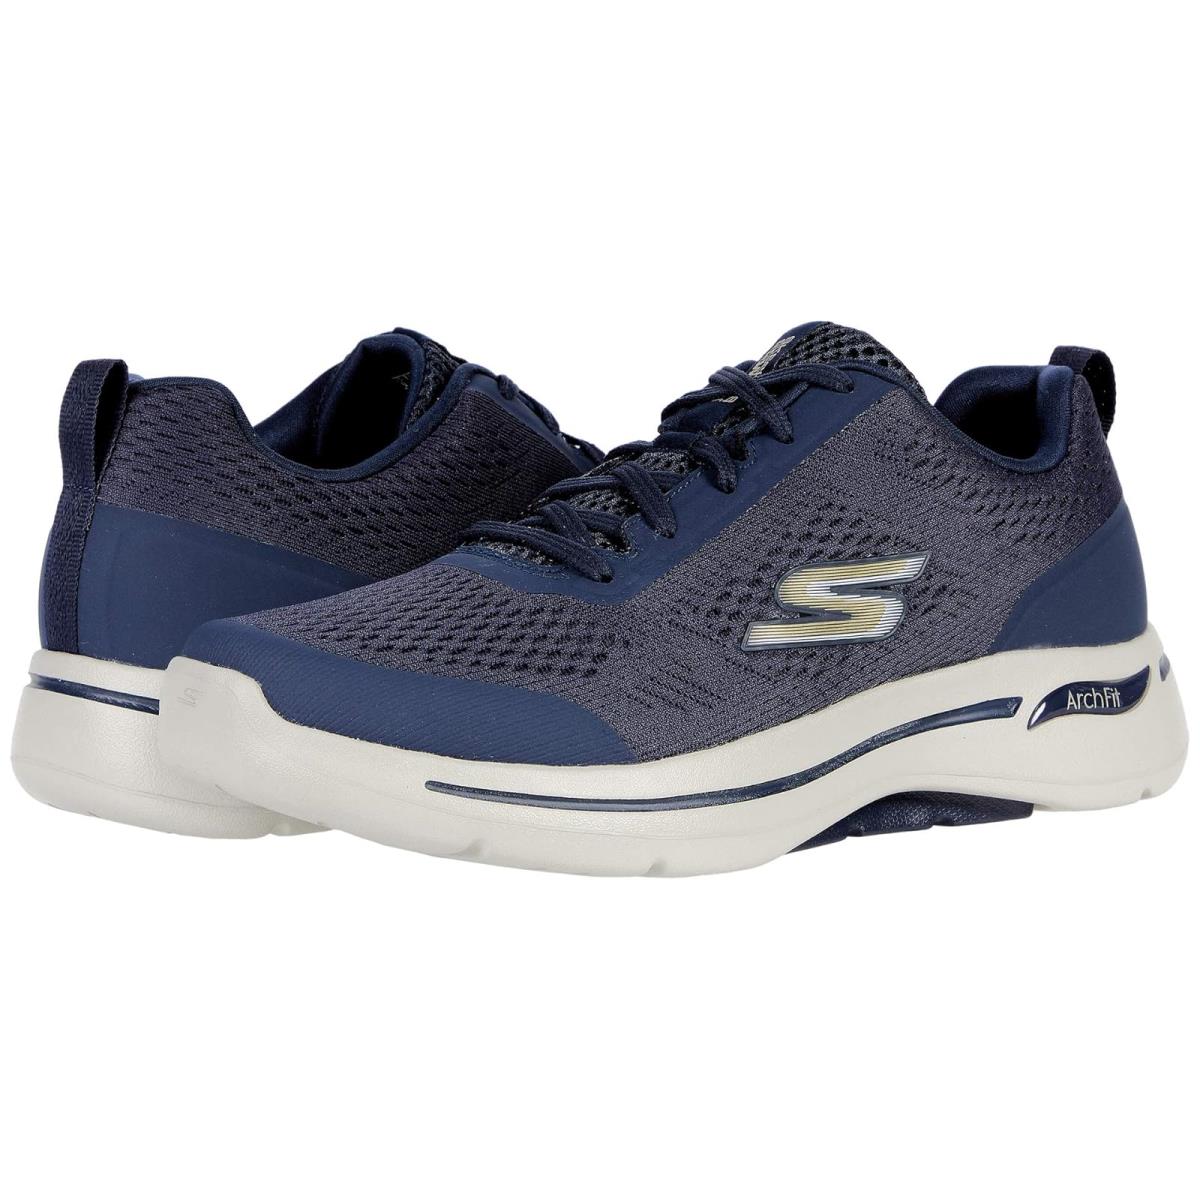 Man`s Shoes Skechers Performance Go Walk Arch Fit - Idyllic Navy/Gold